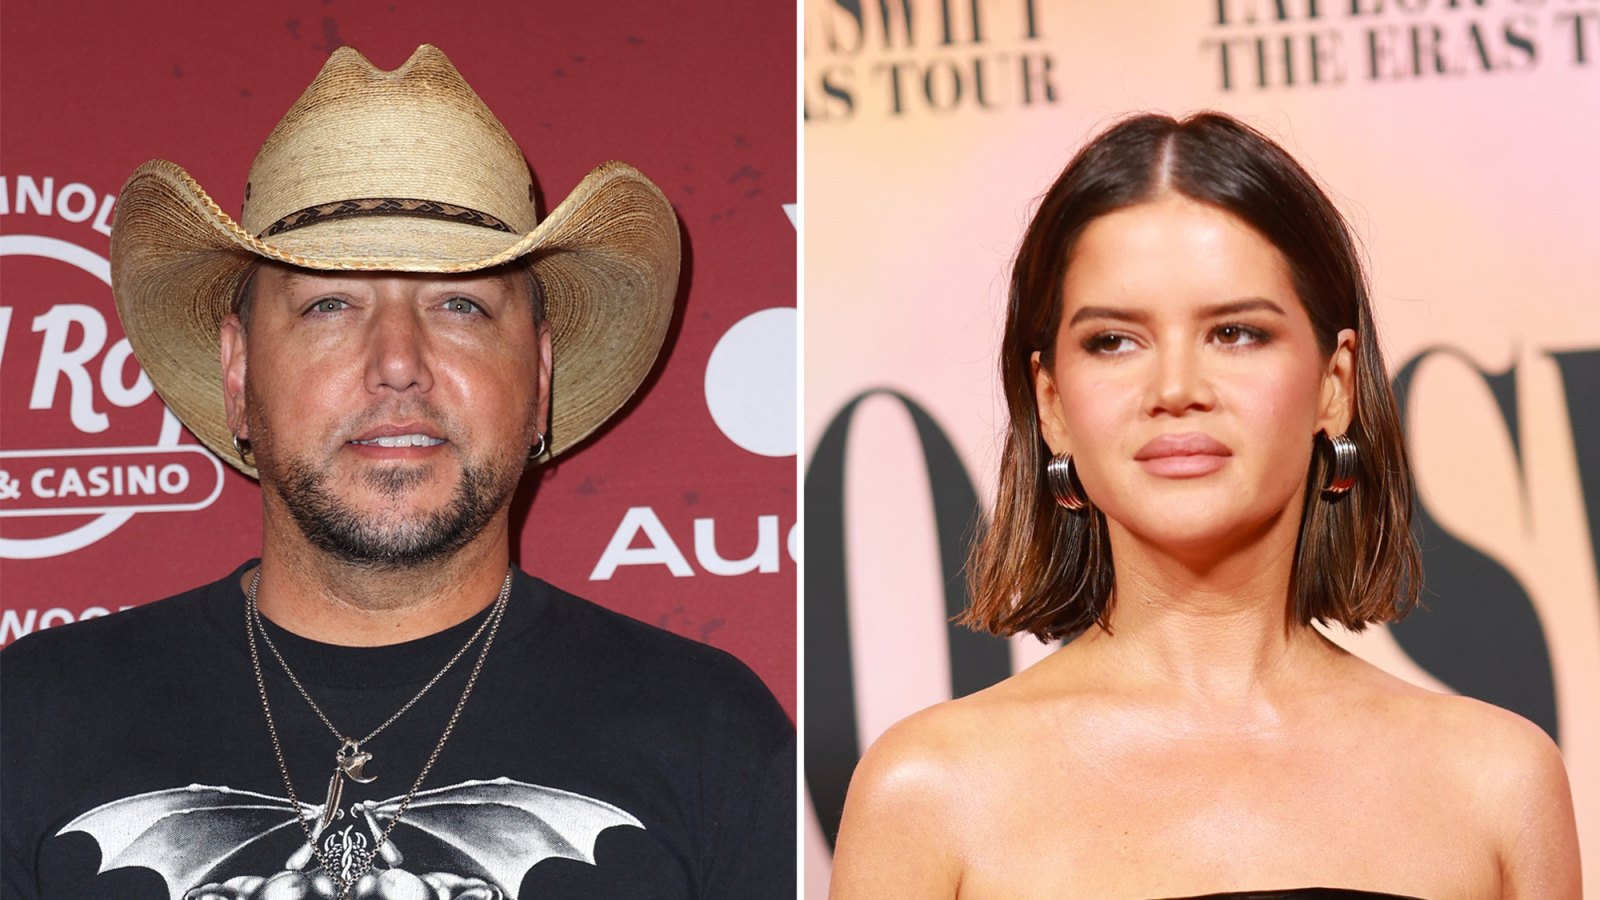 Jason Aldean Claims He Never Even Talked to Maren Morris Before Her Feud With Wife Brittany Aldean